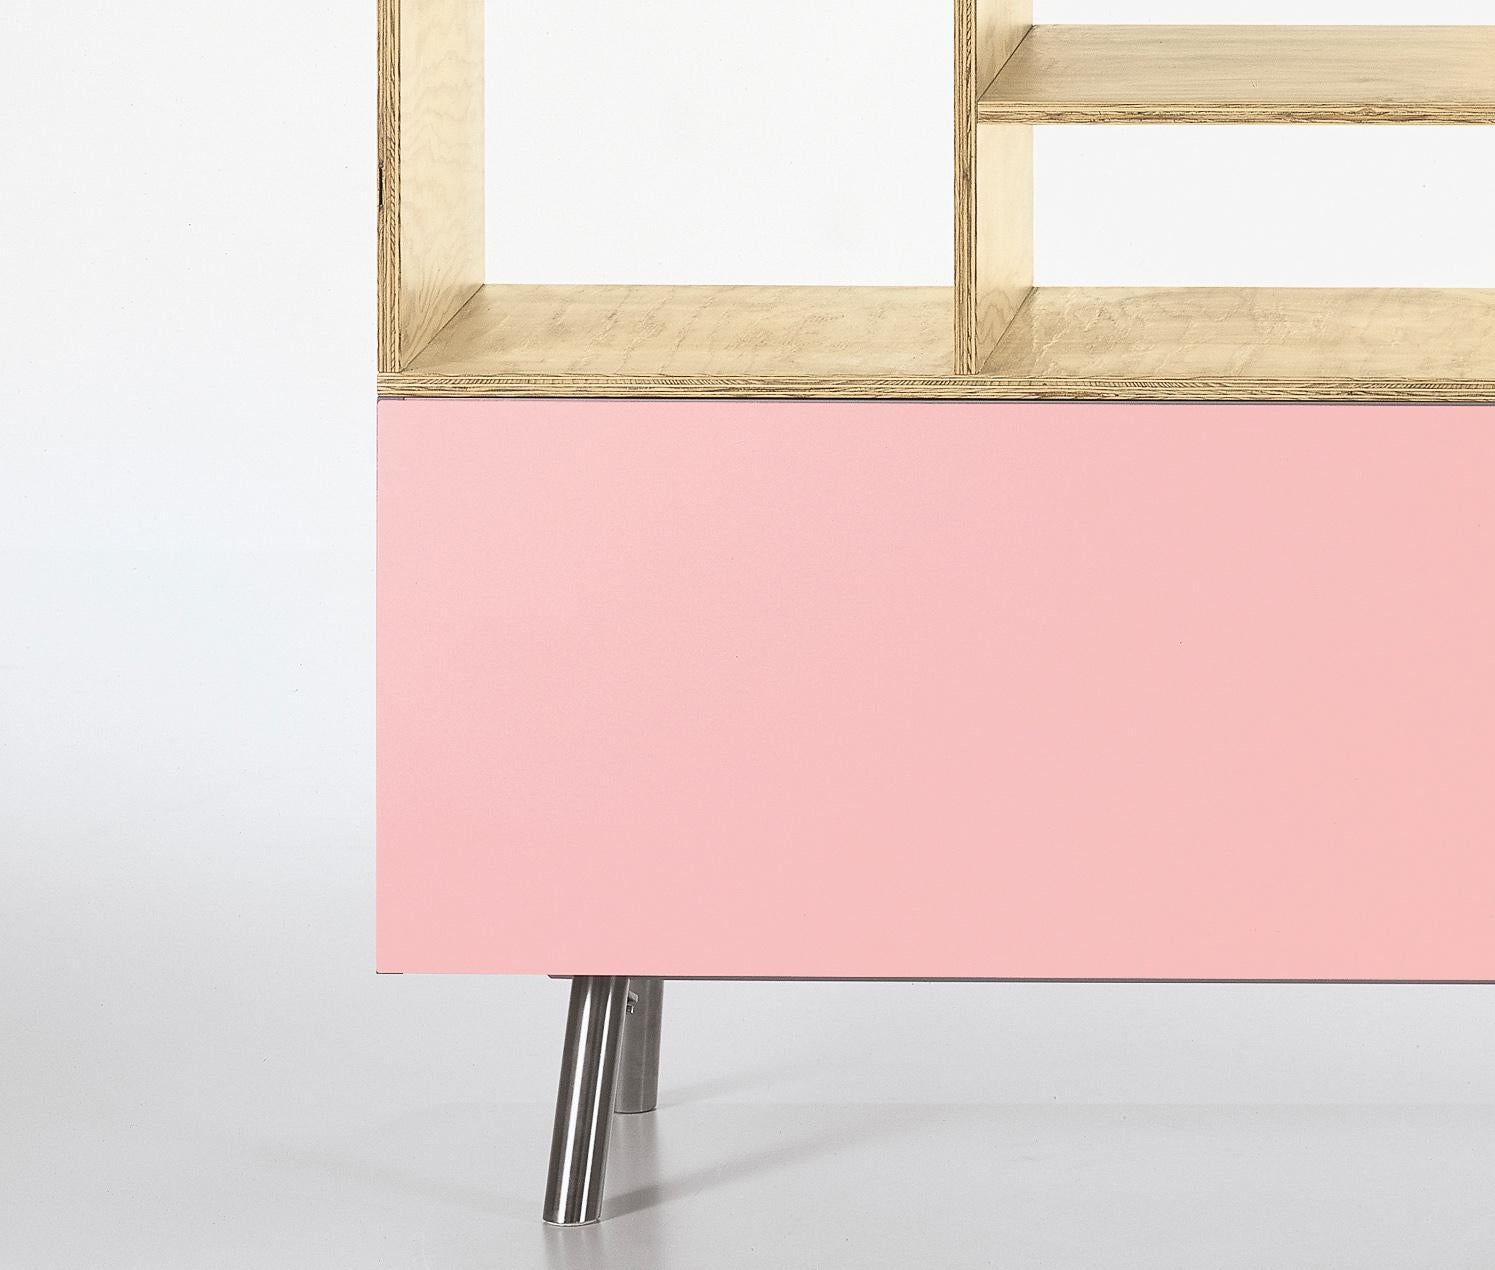 These items are only available in the United States.

Modular in structure, the Kast storage unit starts with a sideboard as the base version. Maarten Van Severen paid special attention to the colors of the sliding doors, which not only emphasize